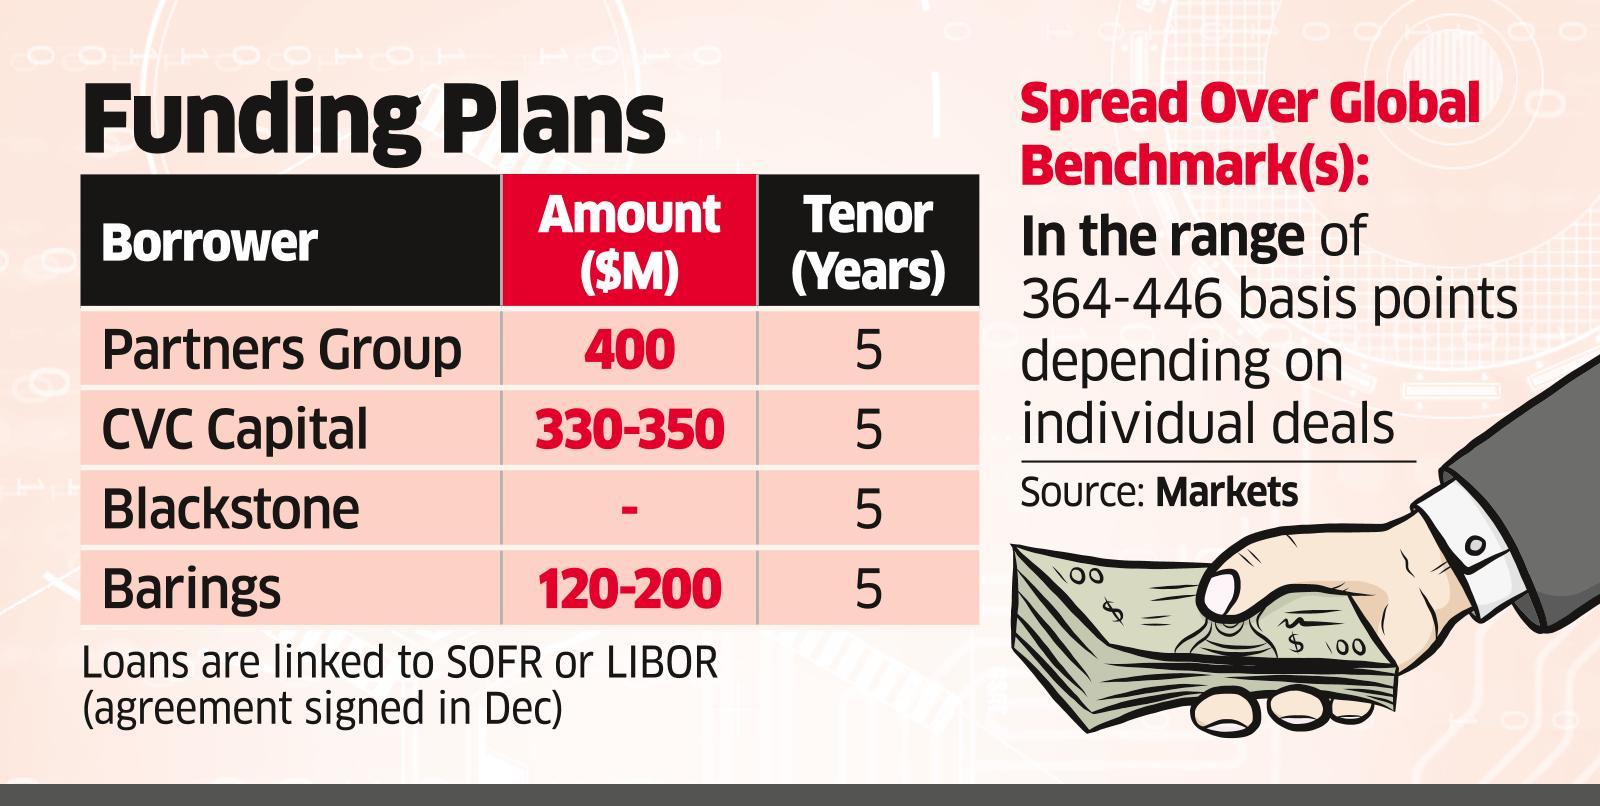 Ie ambulance play piano PE funds: Four PE funds in talks to raise over $1 billion for India buys -  The Economic Times